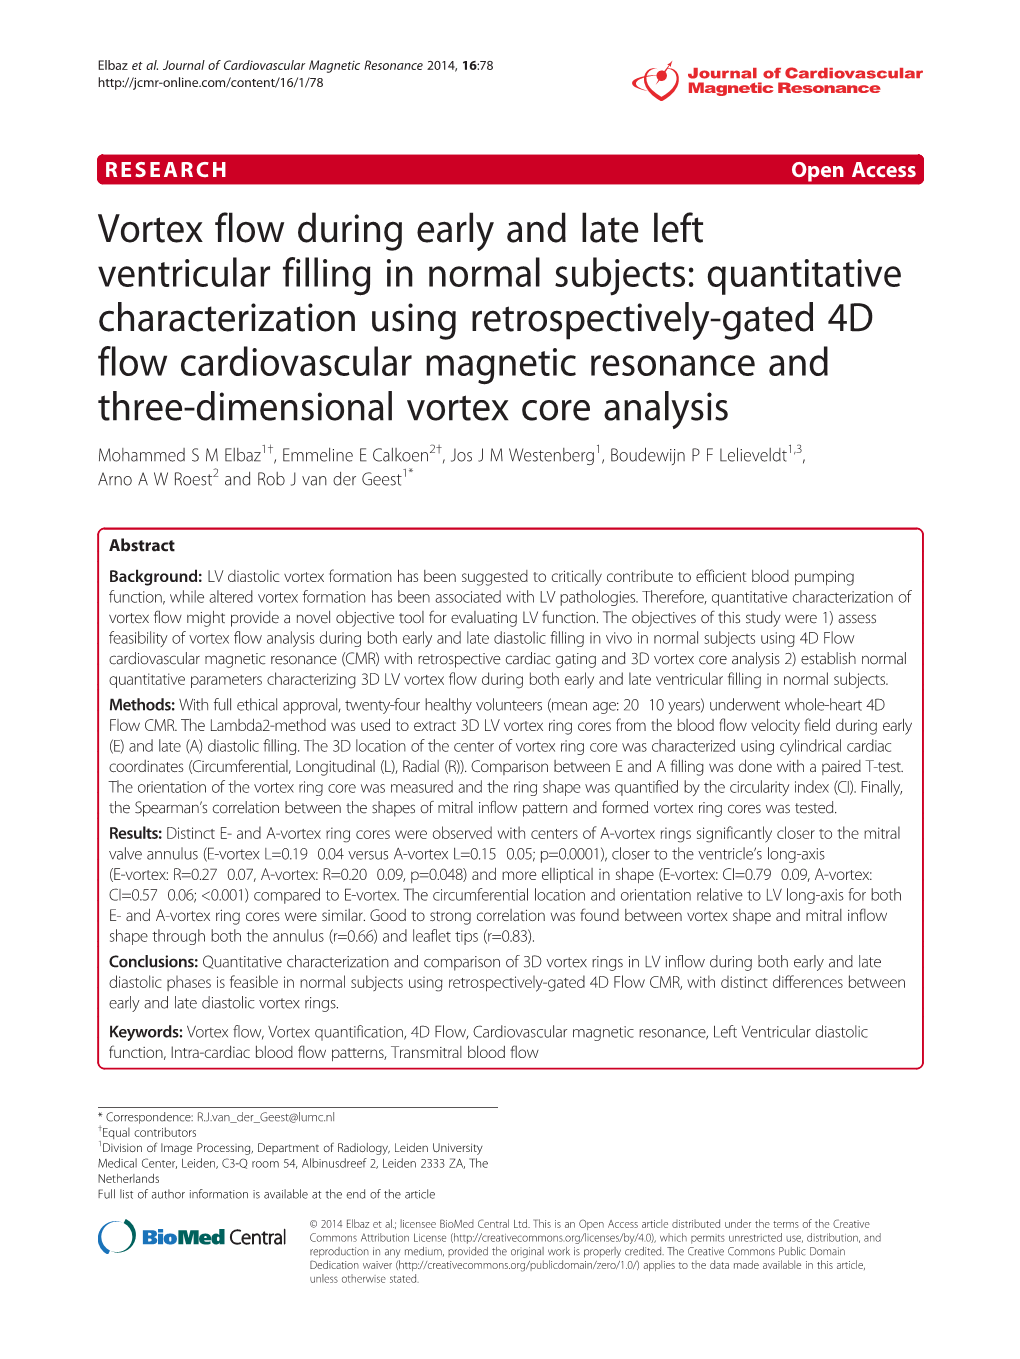 Vortex Flow During Early and Late Left Ventricular Filling in Normal Subjects